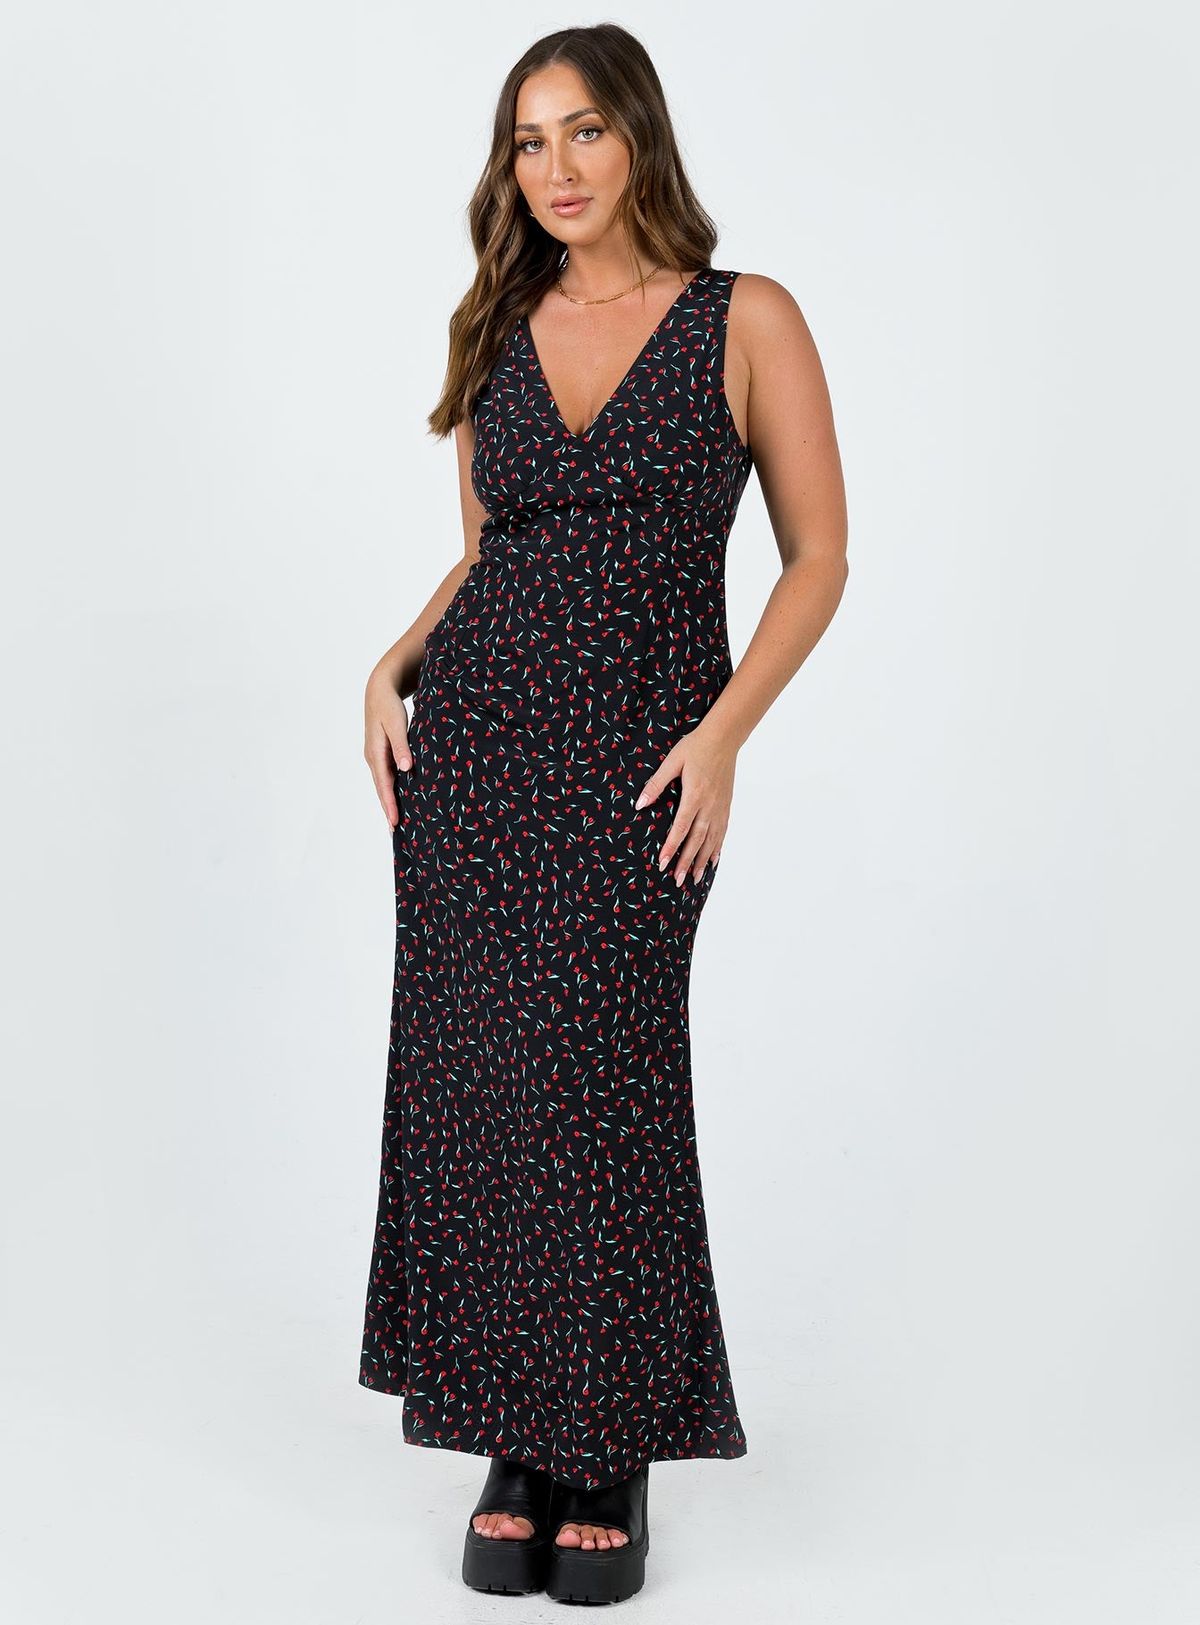 Style 1188143 Princess Polly Size 10 Floral Black Cocktail Dress on Queenly